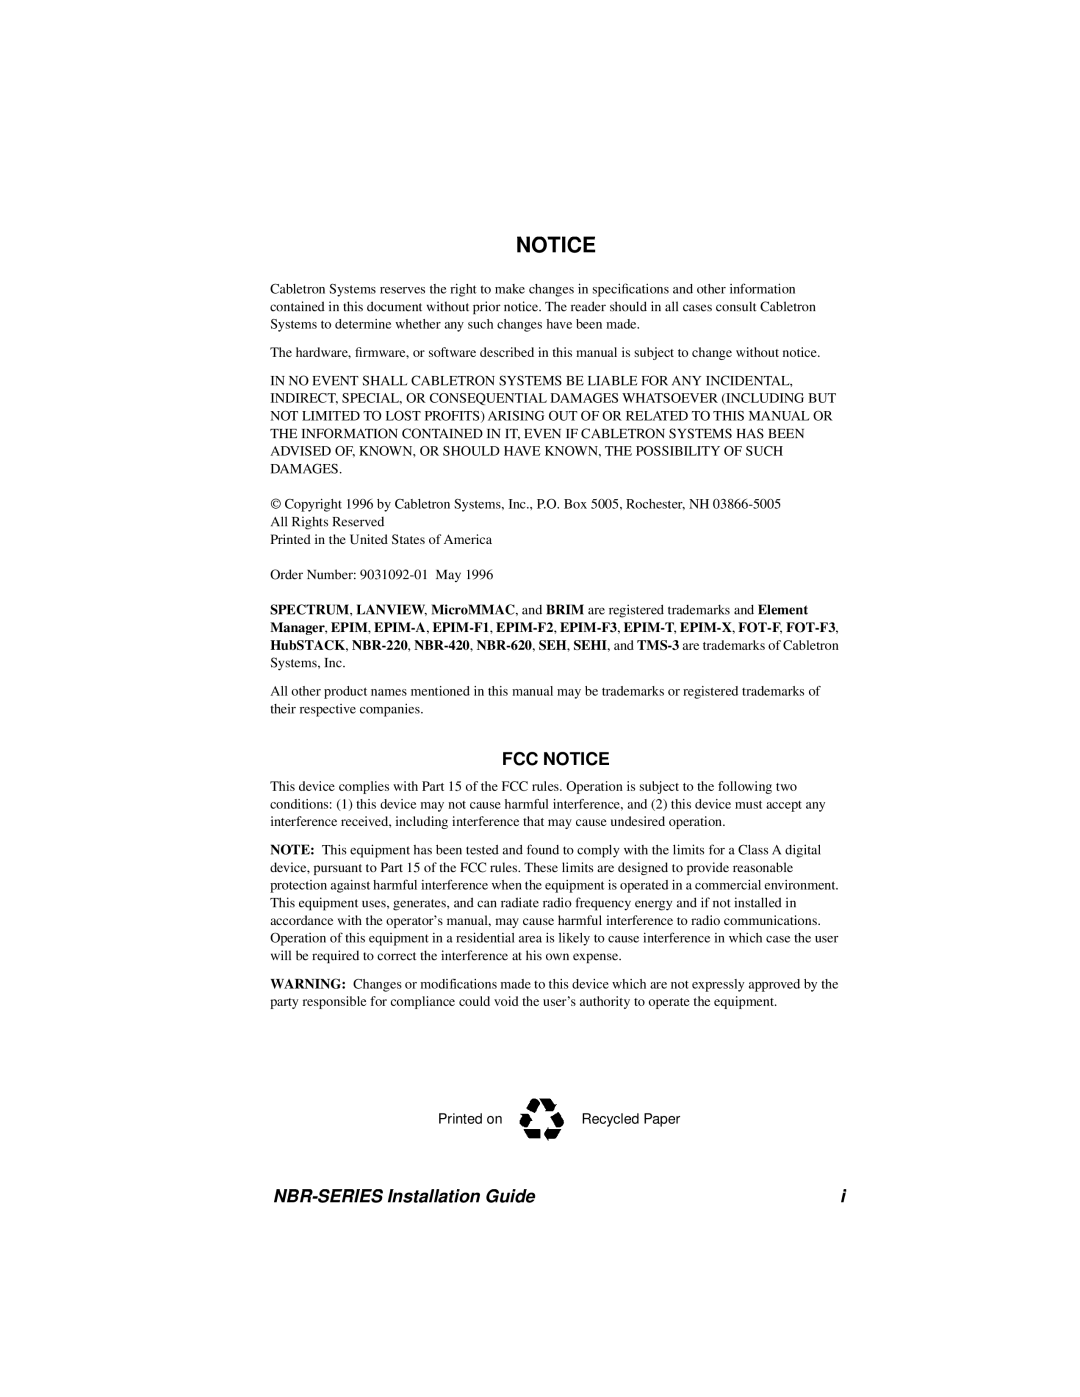 Cabletron Systems NBR-620, NBR-420, NBR-220 manual Fcc Notice, NBR-SERIES Installation Guide 